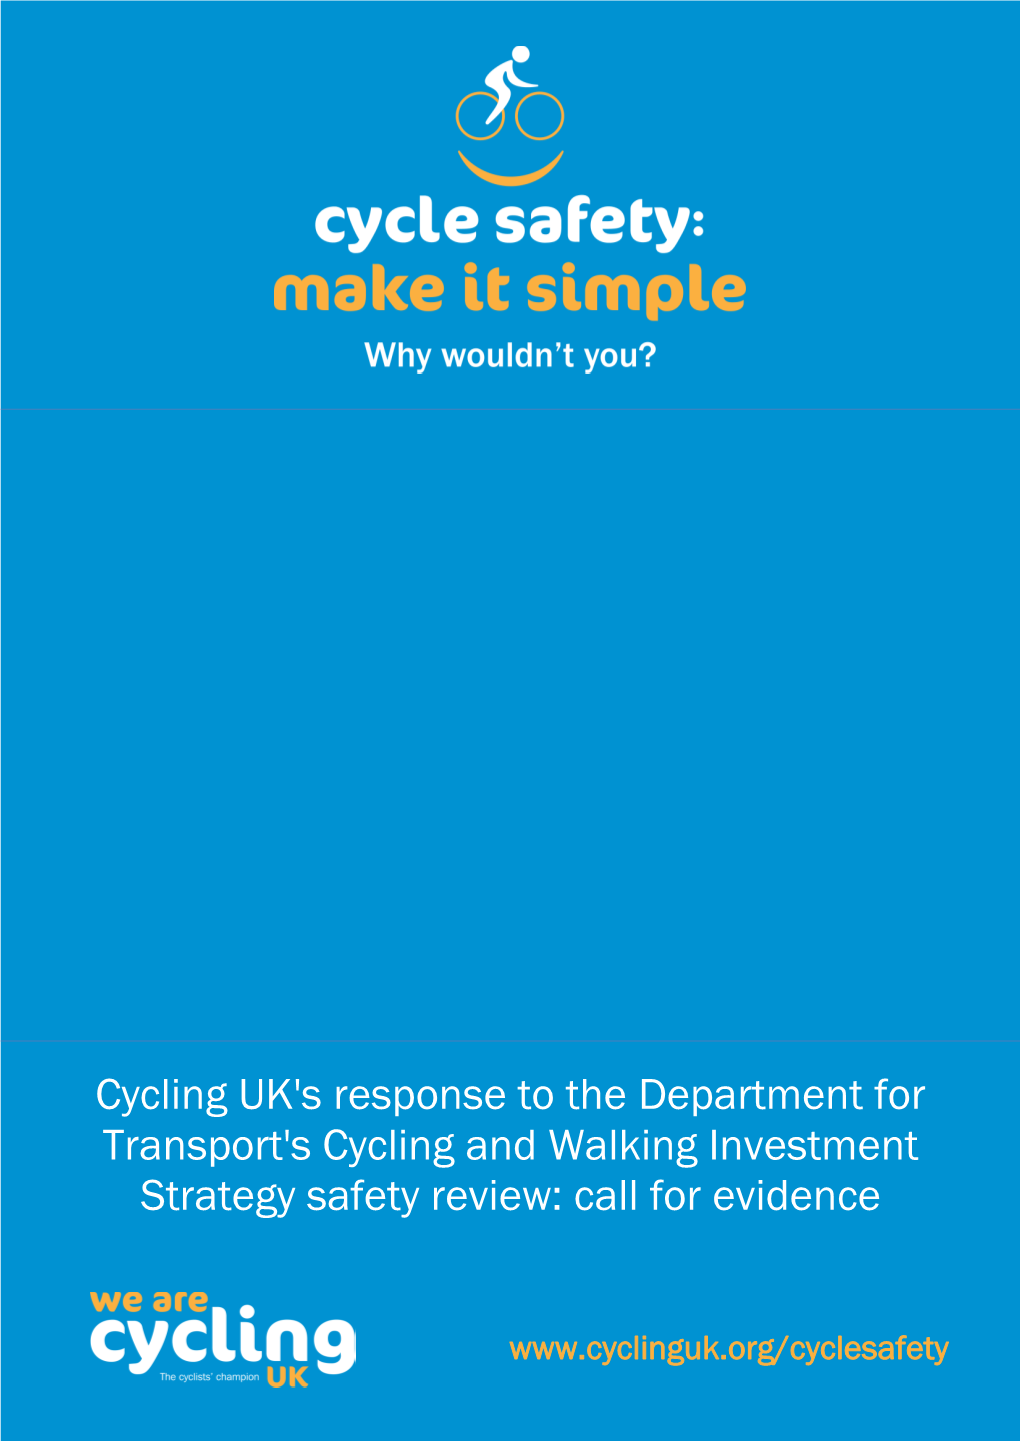 Cycling UK's Response to the Department for Transport's Cycling and Walking Investment